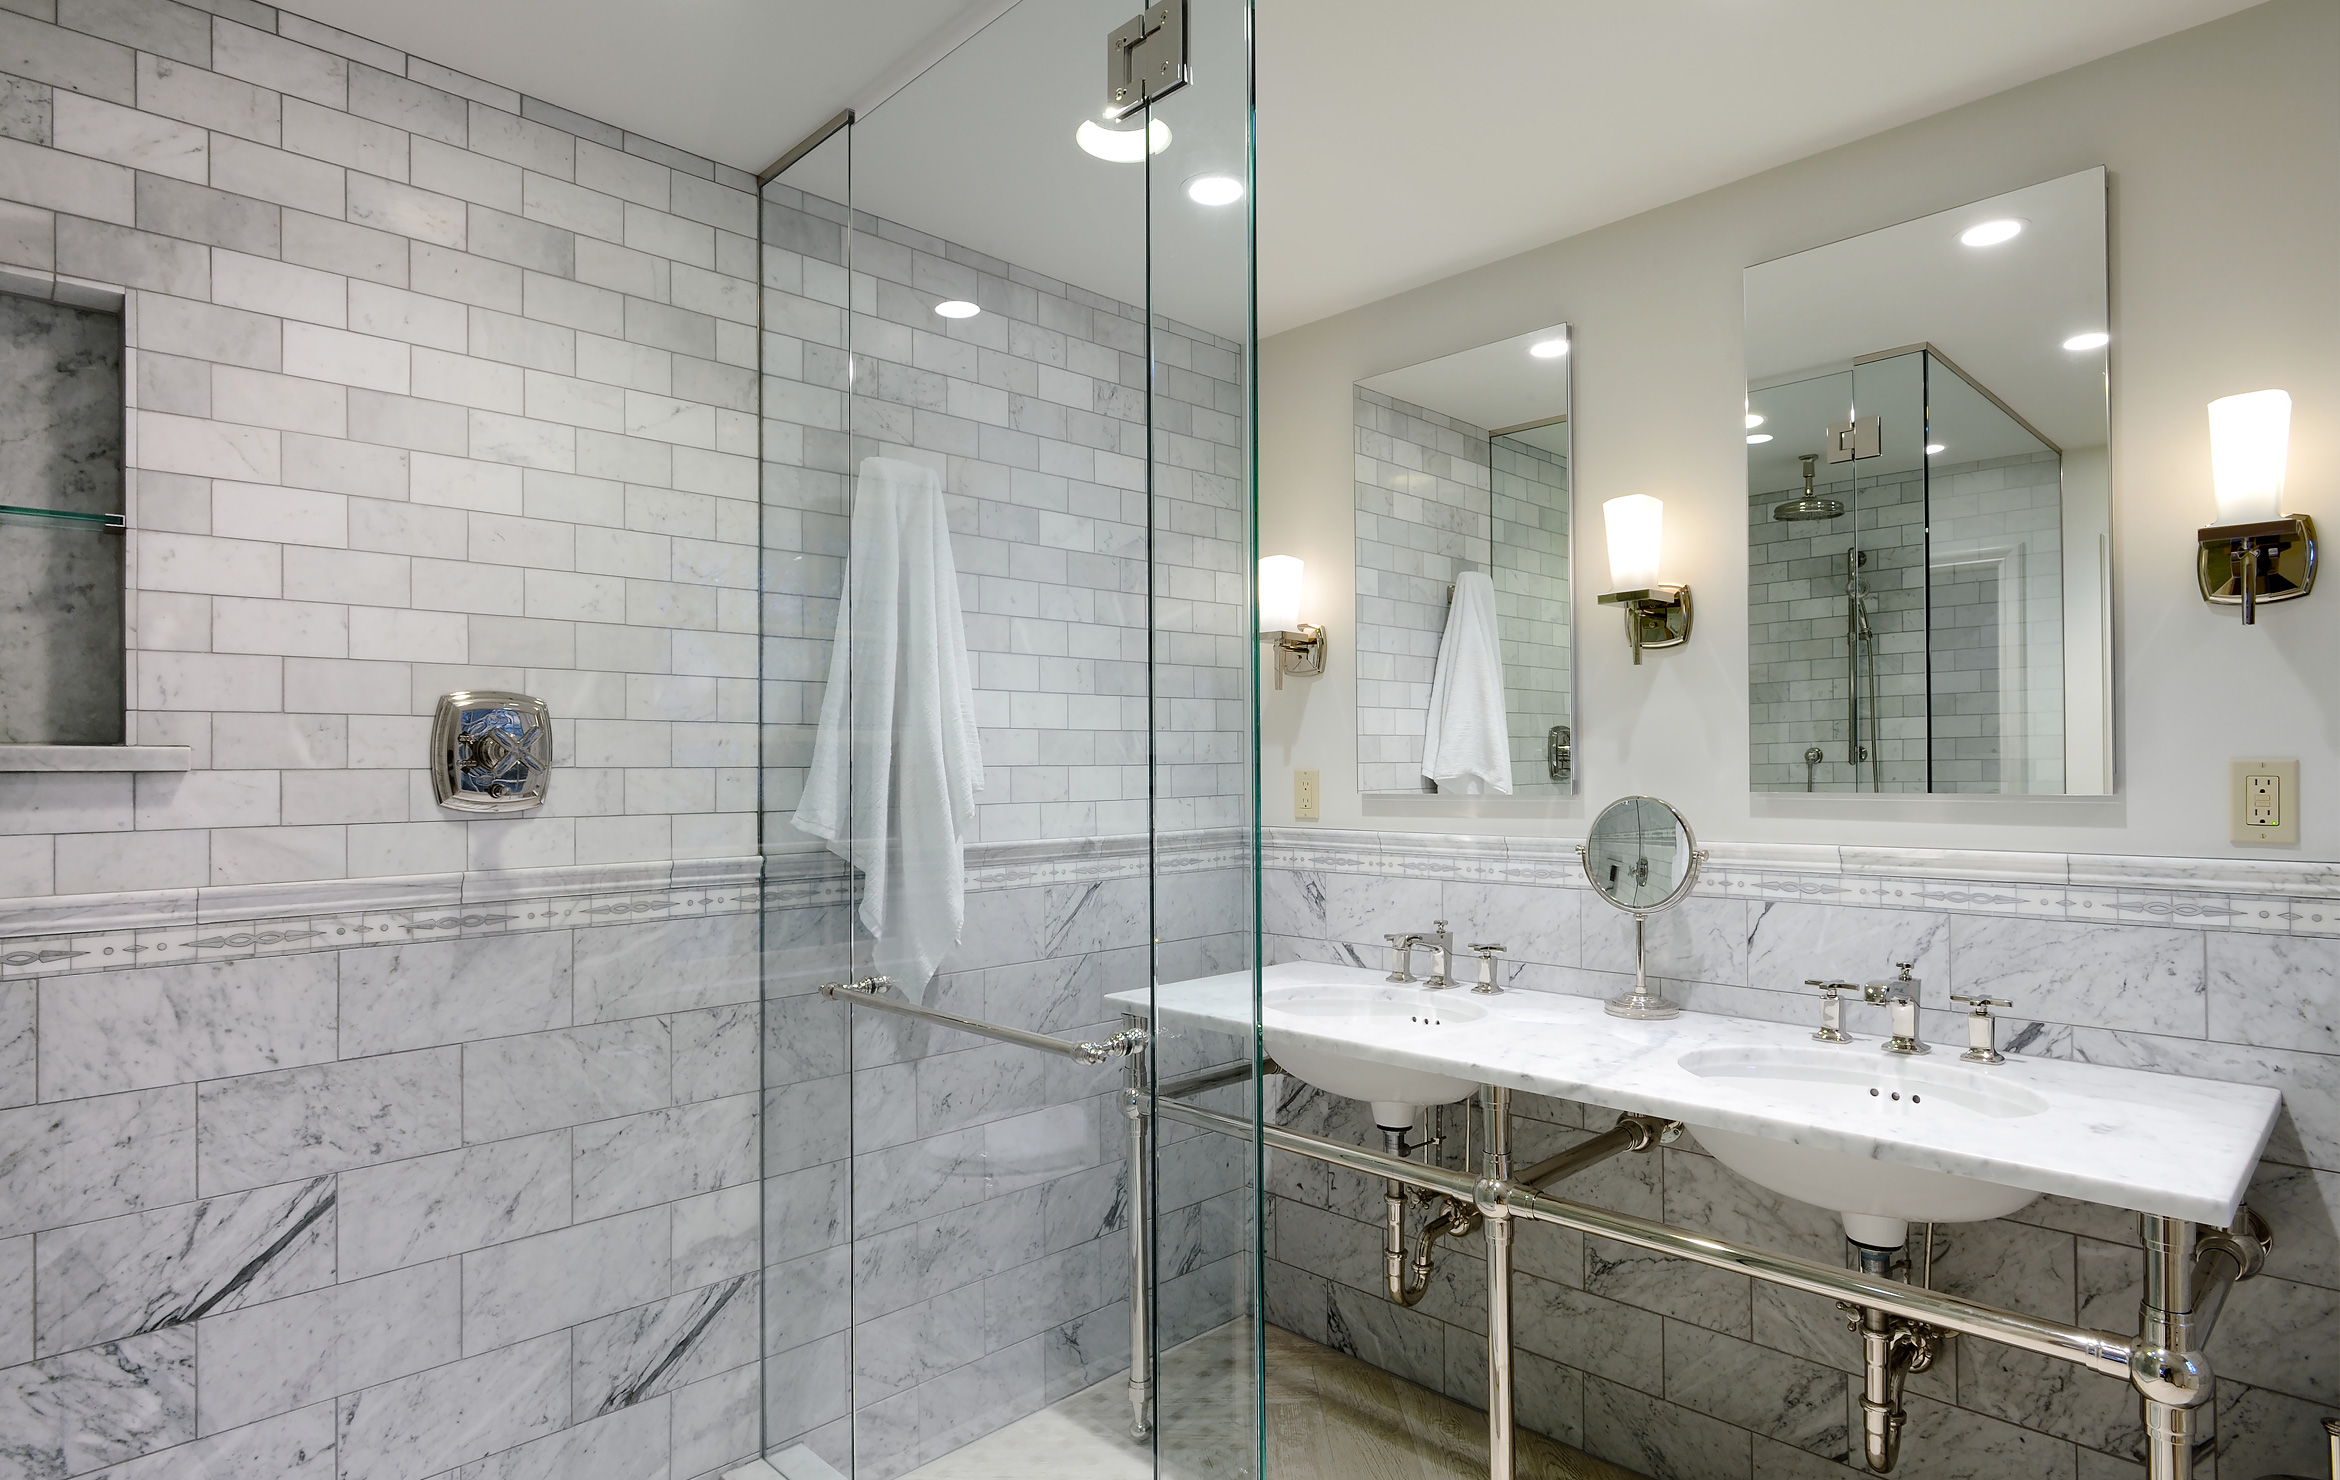 Prepare before you go for bathroom remodels